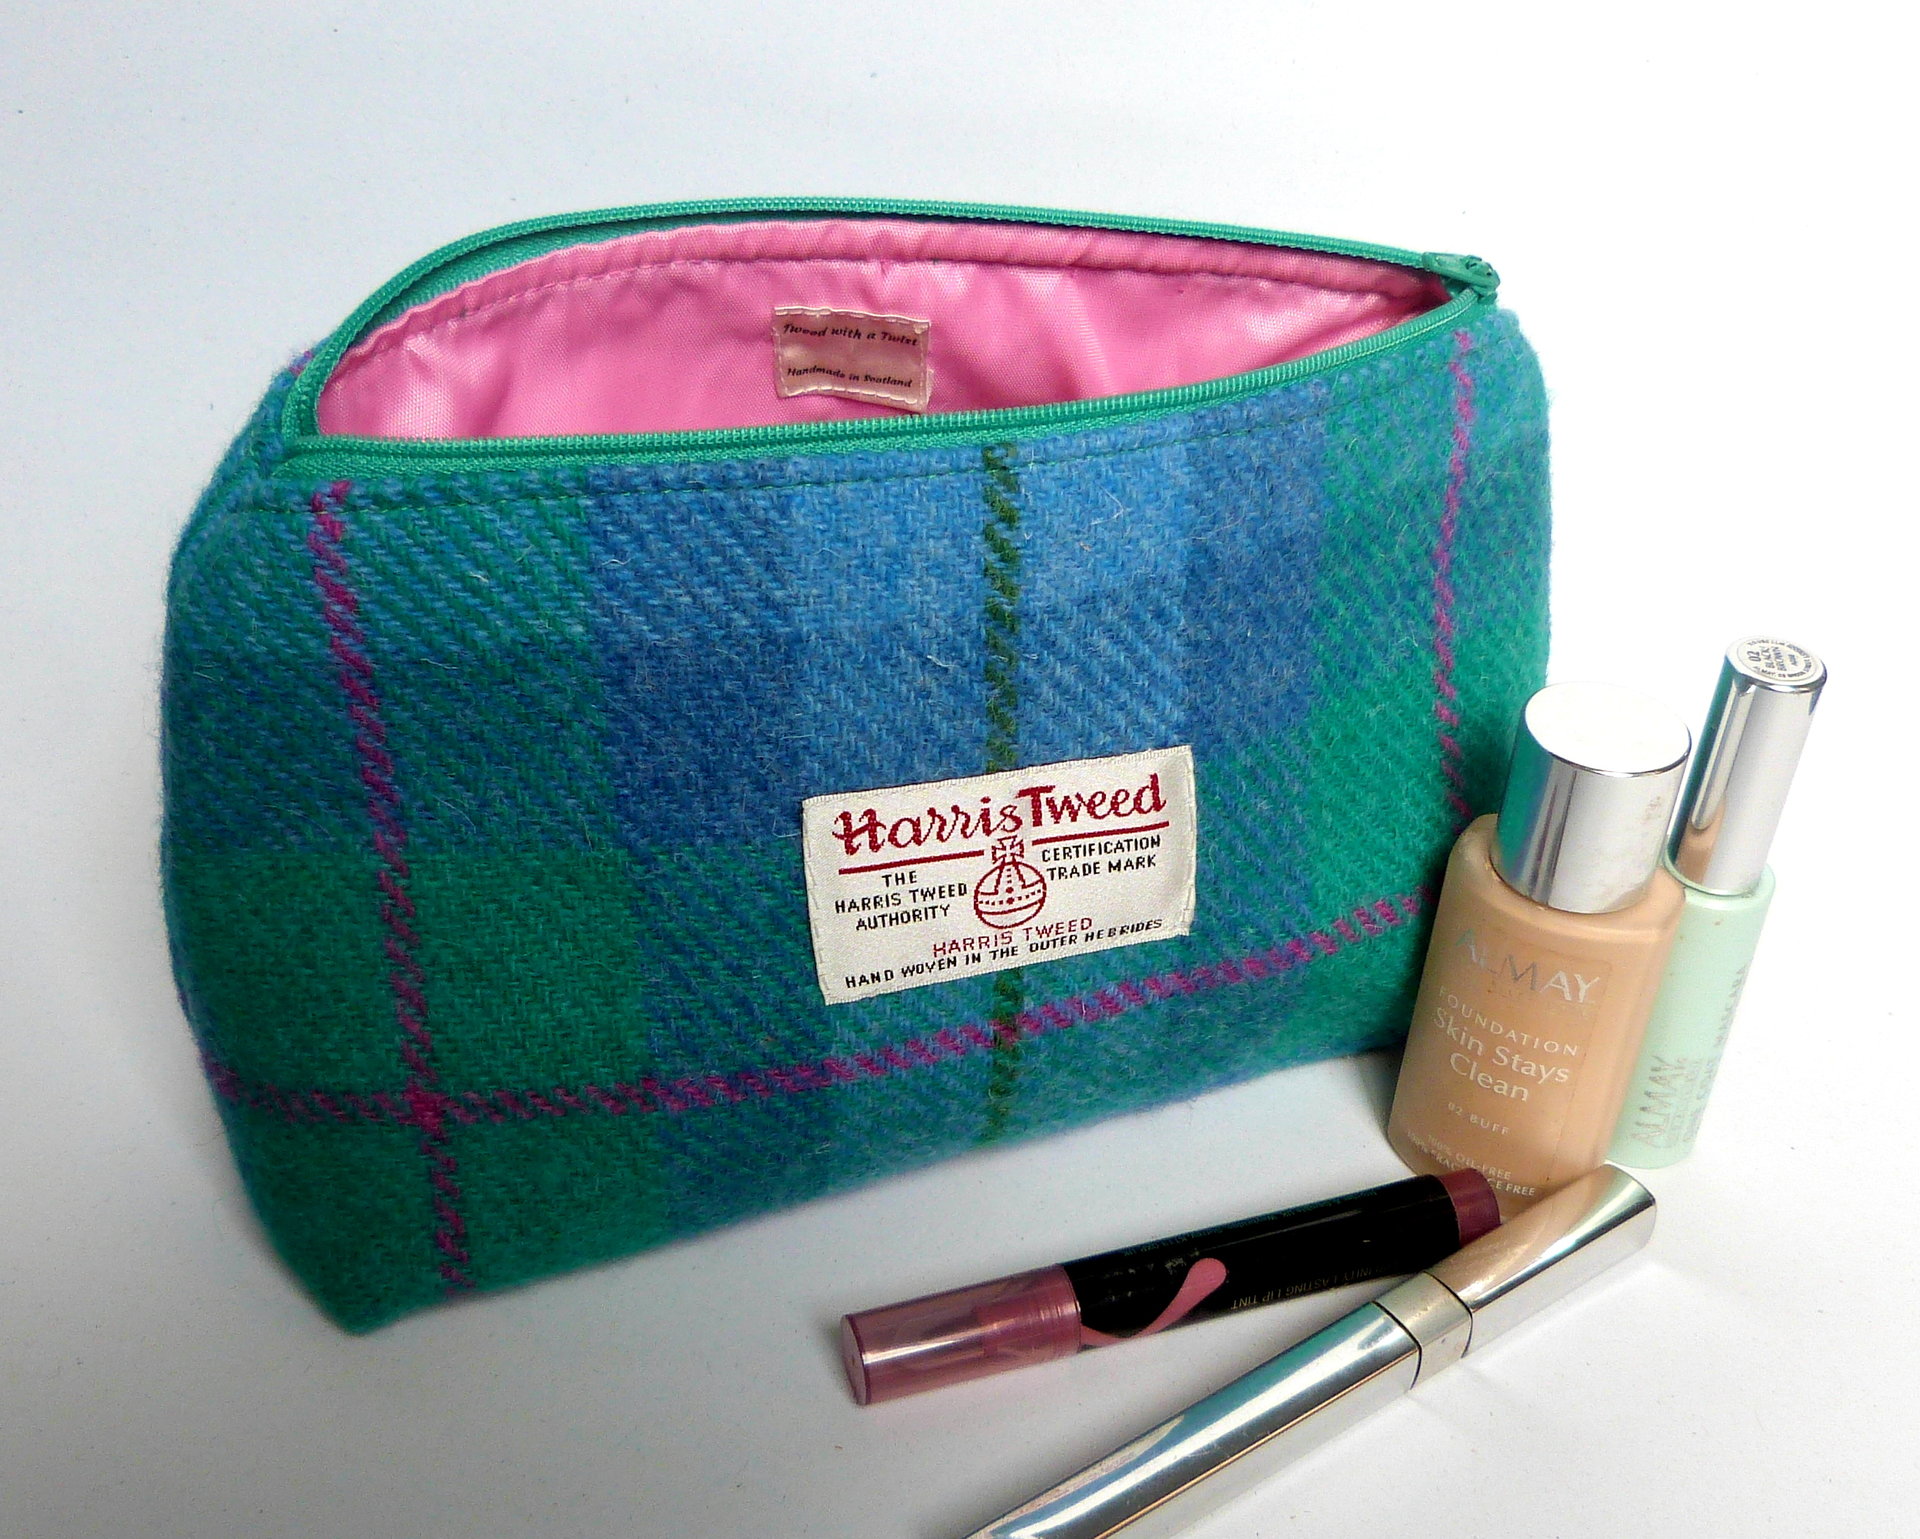 Harris Tweed Jade green, Blue and pink cosmetic bag with  matching compact mirror